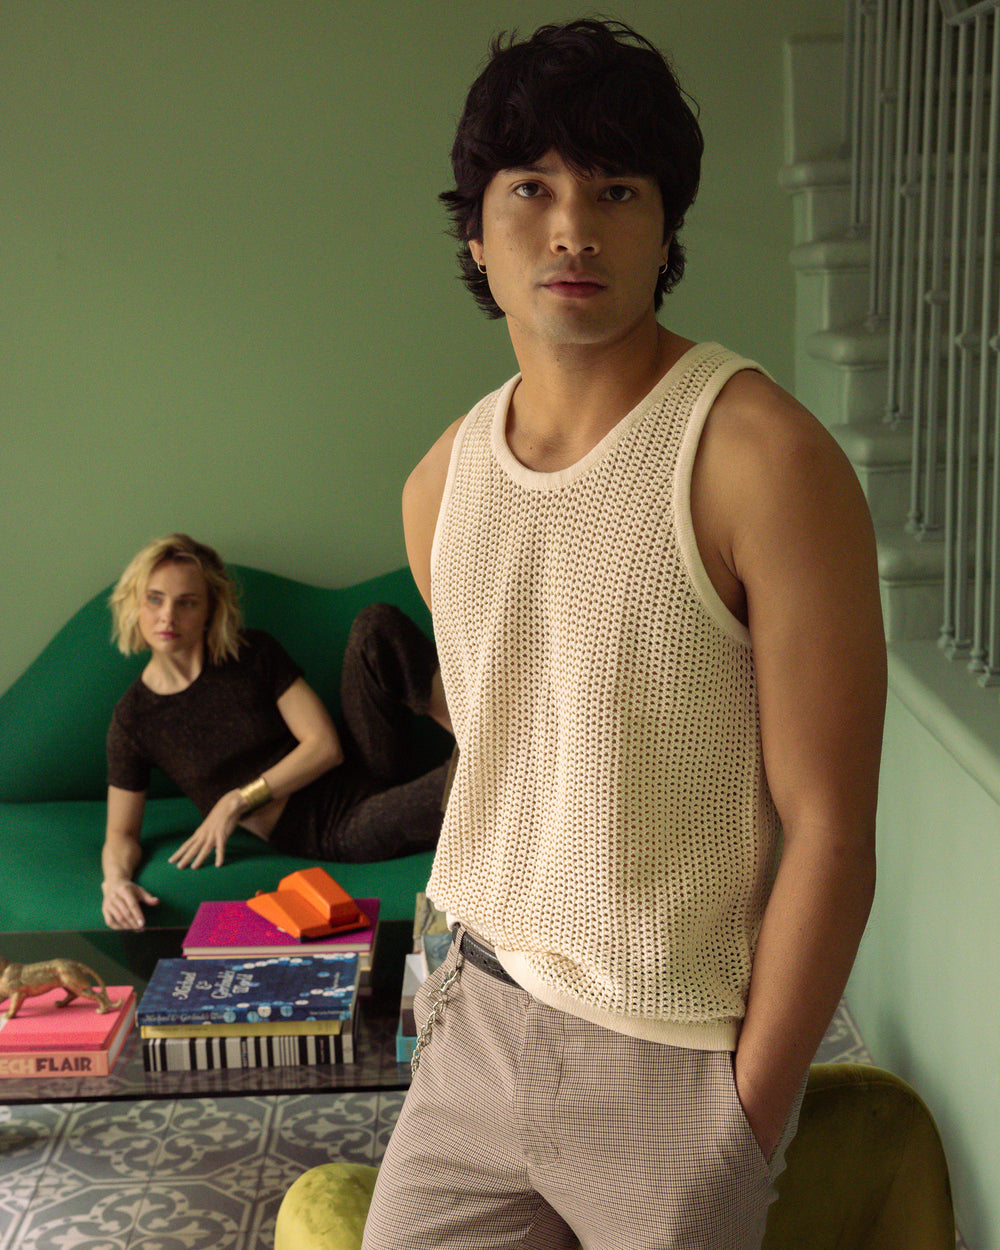 A young man in The Dominica Crochet Tank - Vintage Ivory by Dandy Del Mar stands in the foreground, while a woman sitting on a green couch looks on from the background, in a room with books on the coffee table.